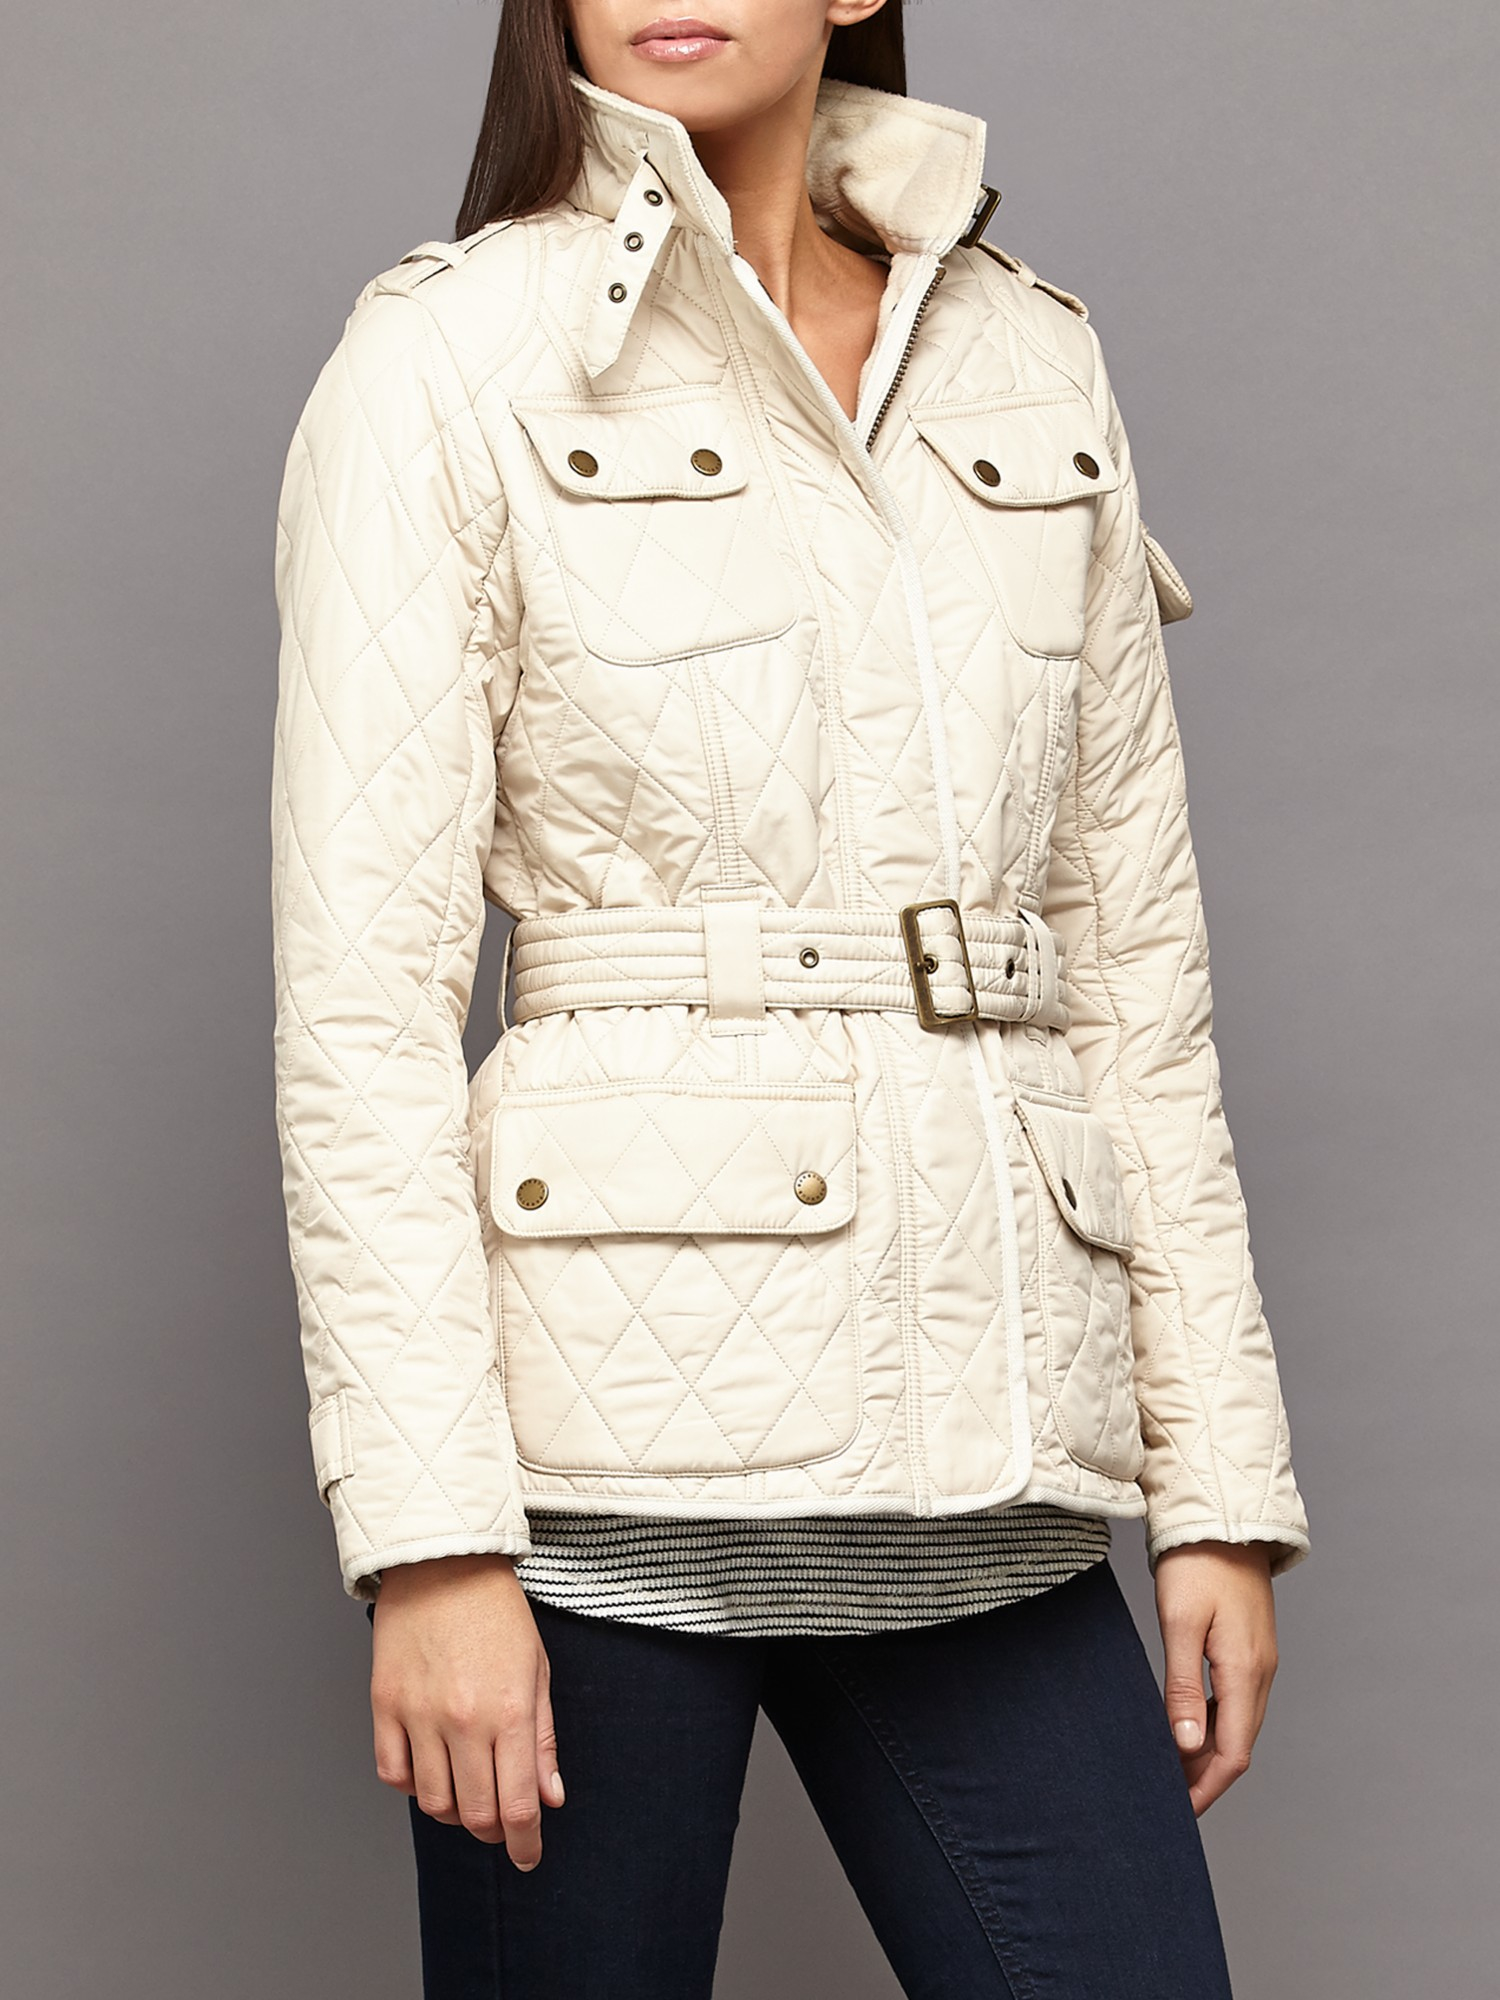 Barbour Tourer Polar Quilted Jacket in White - Lyst